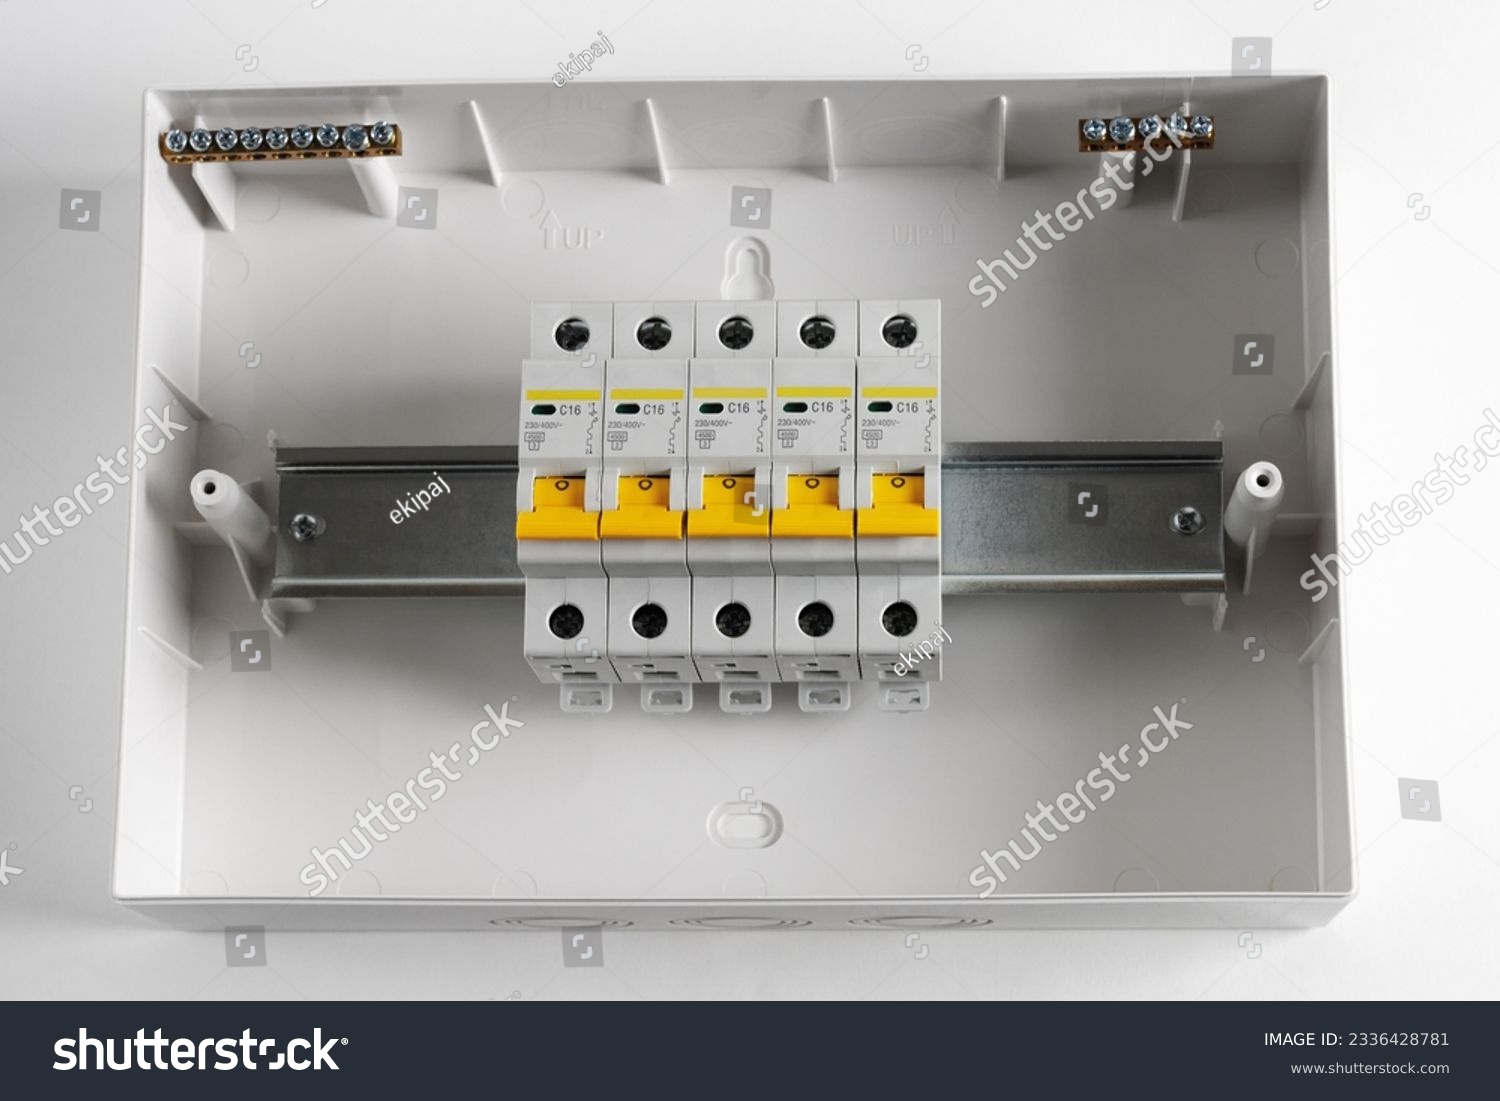 Plastic distribution board. Electrical board. Close-up. Isolated on light gray background. #2336428781